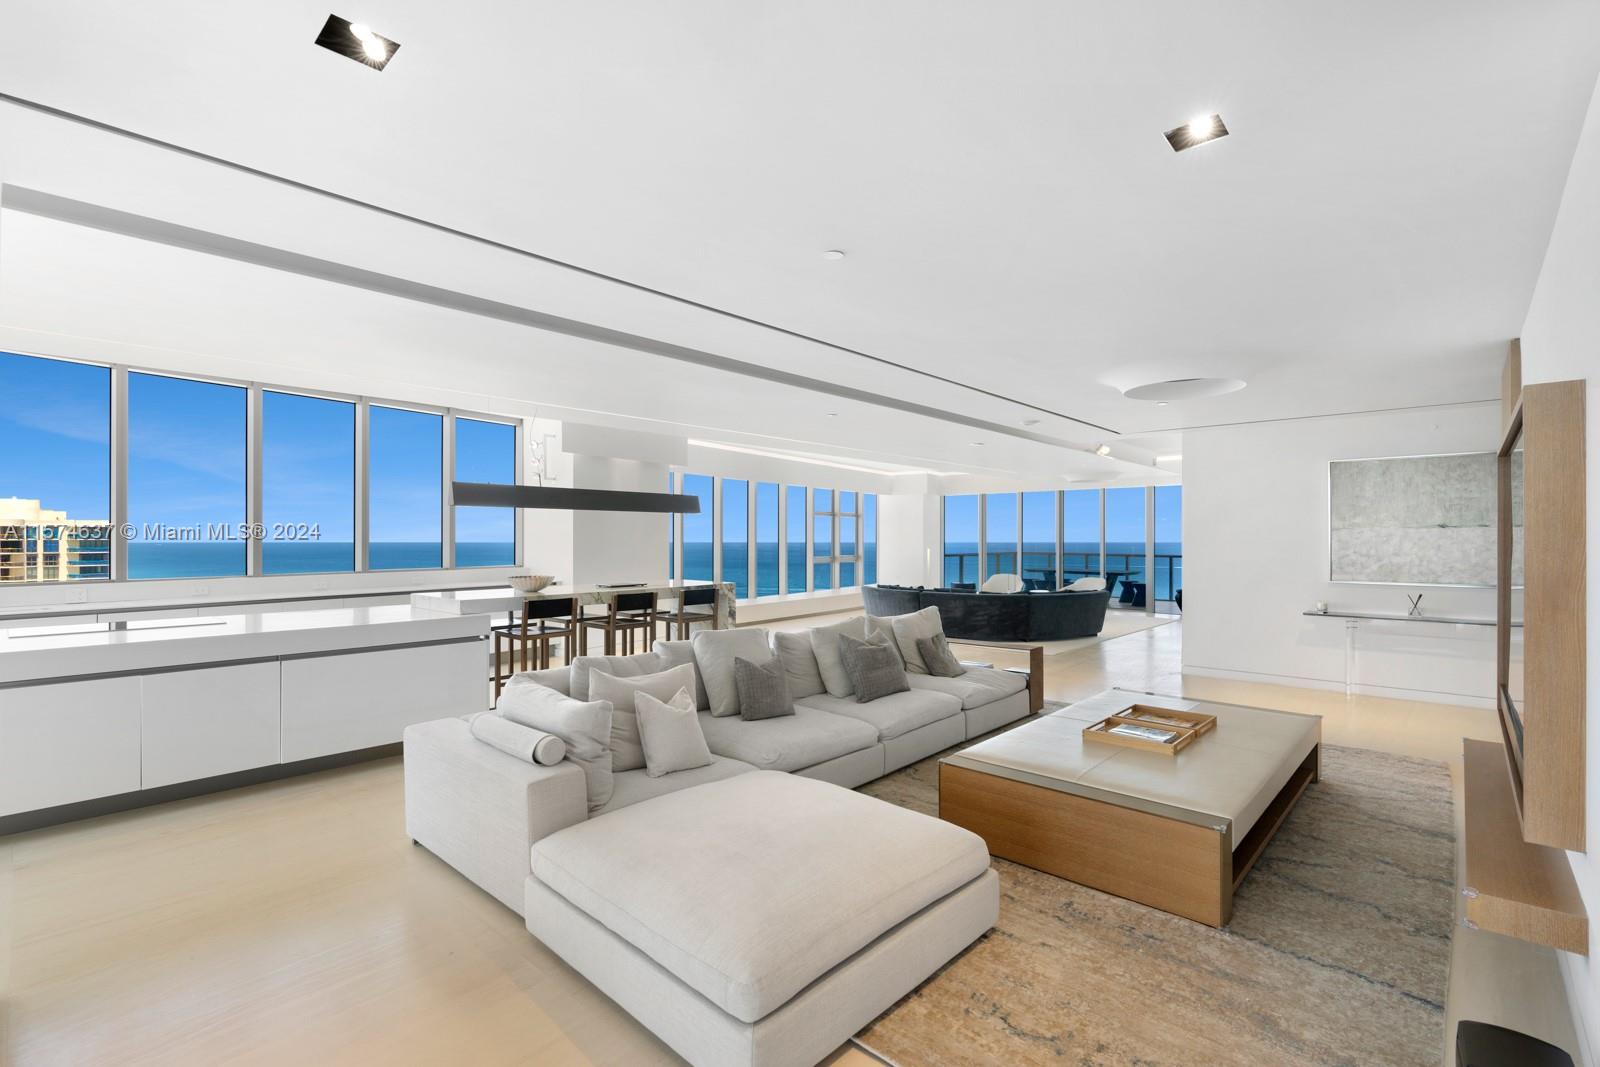 Unique opportunity to live in one of the few meticulously renovated corner residences at The St. Regis in Bal Harbour. Private elevator provides direct entry into the unit, which greets you with an expansive living space filled with natural light from your floor-to-ceiling windows that frame the panoramic ocean views. The kitchen has been reconfigured to maximize the East, North, and West exposures, with top-of-the-line finishes such as Calacatta marble. Enjoy the ocean breeze with three balconies spanning 1,132 SF with ample room for lounging and entertaining. Residents of St. Regis enjoy on-site restaurants, Remède Spa with steam and sauna facilities, cold and hot plunges, 2 ocean-view pools, beach cabanas, a 24-hour concierge, and a fitness center.